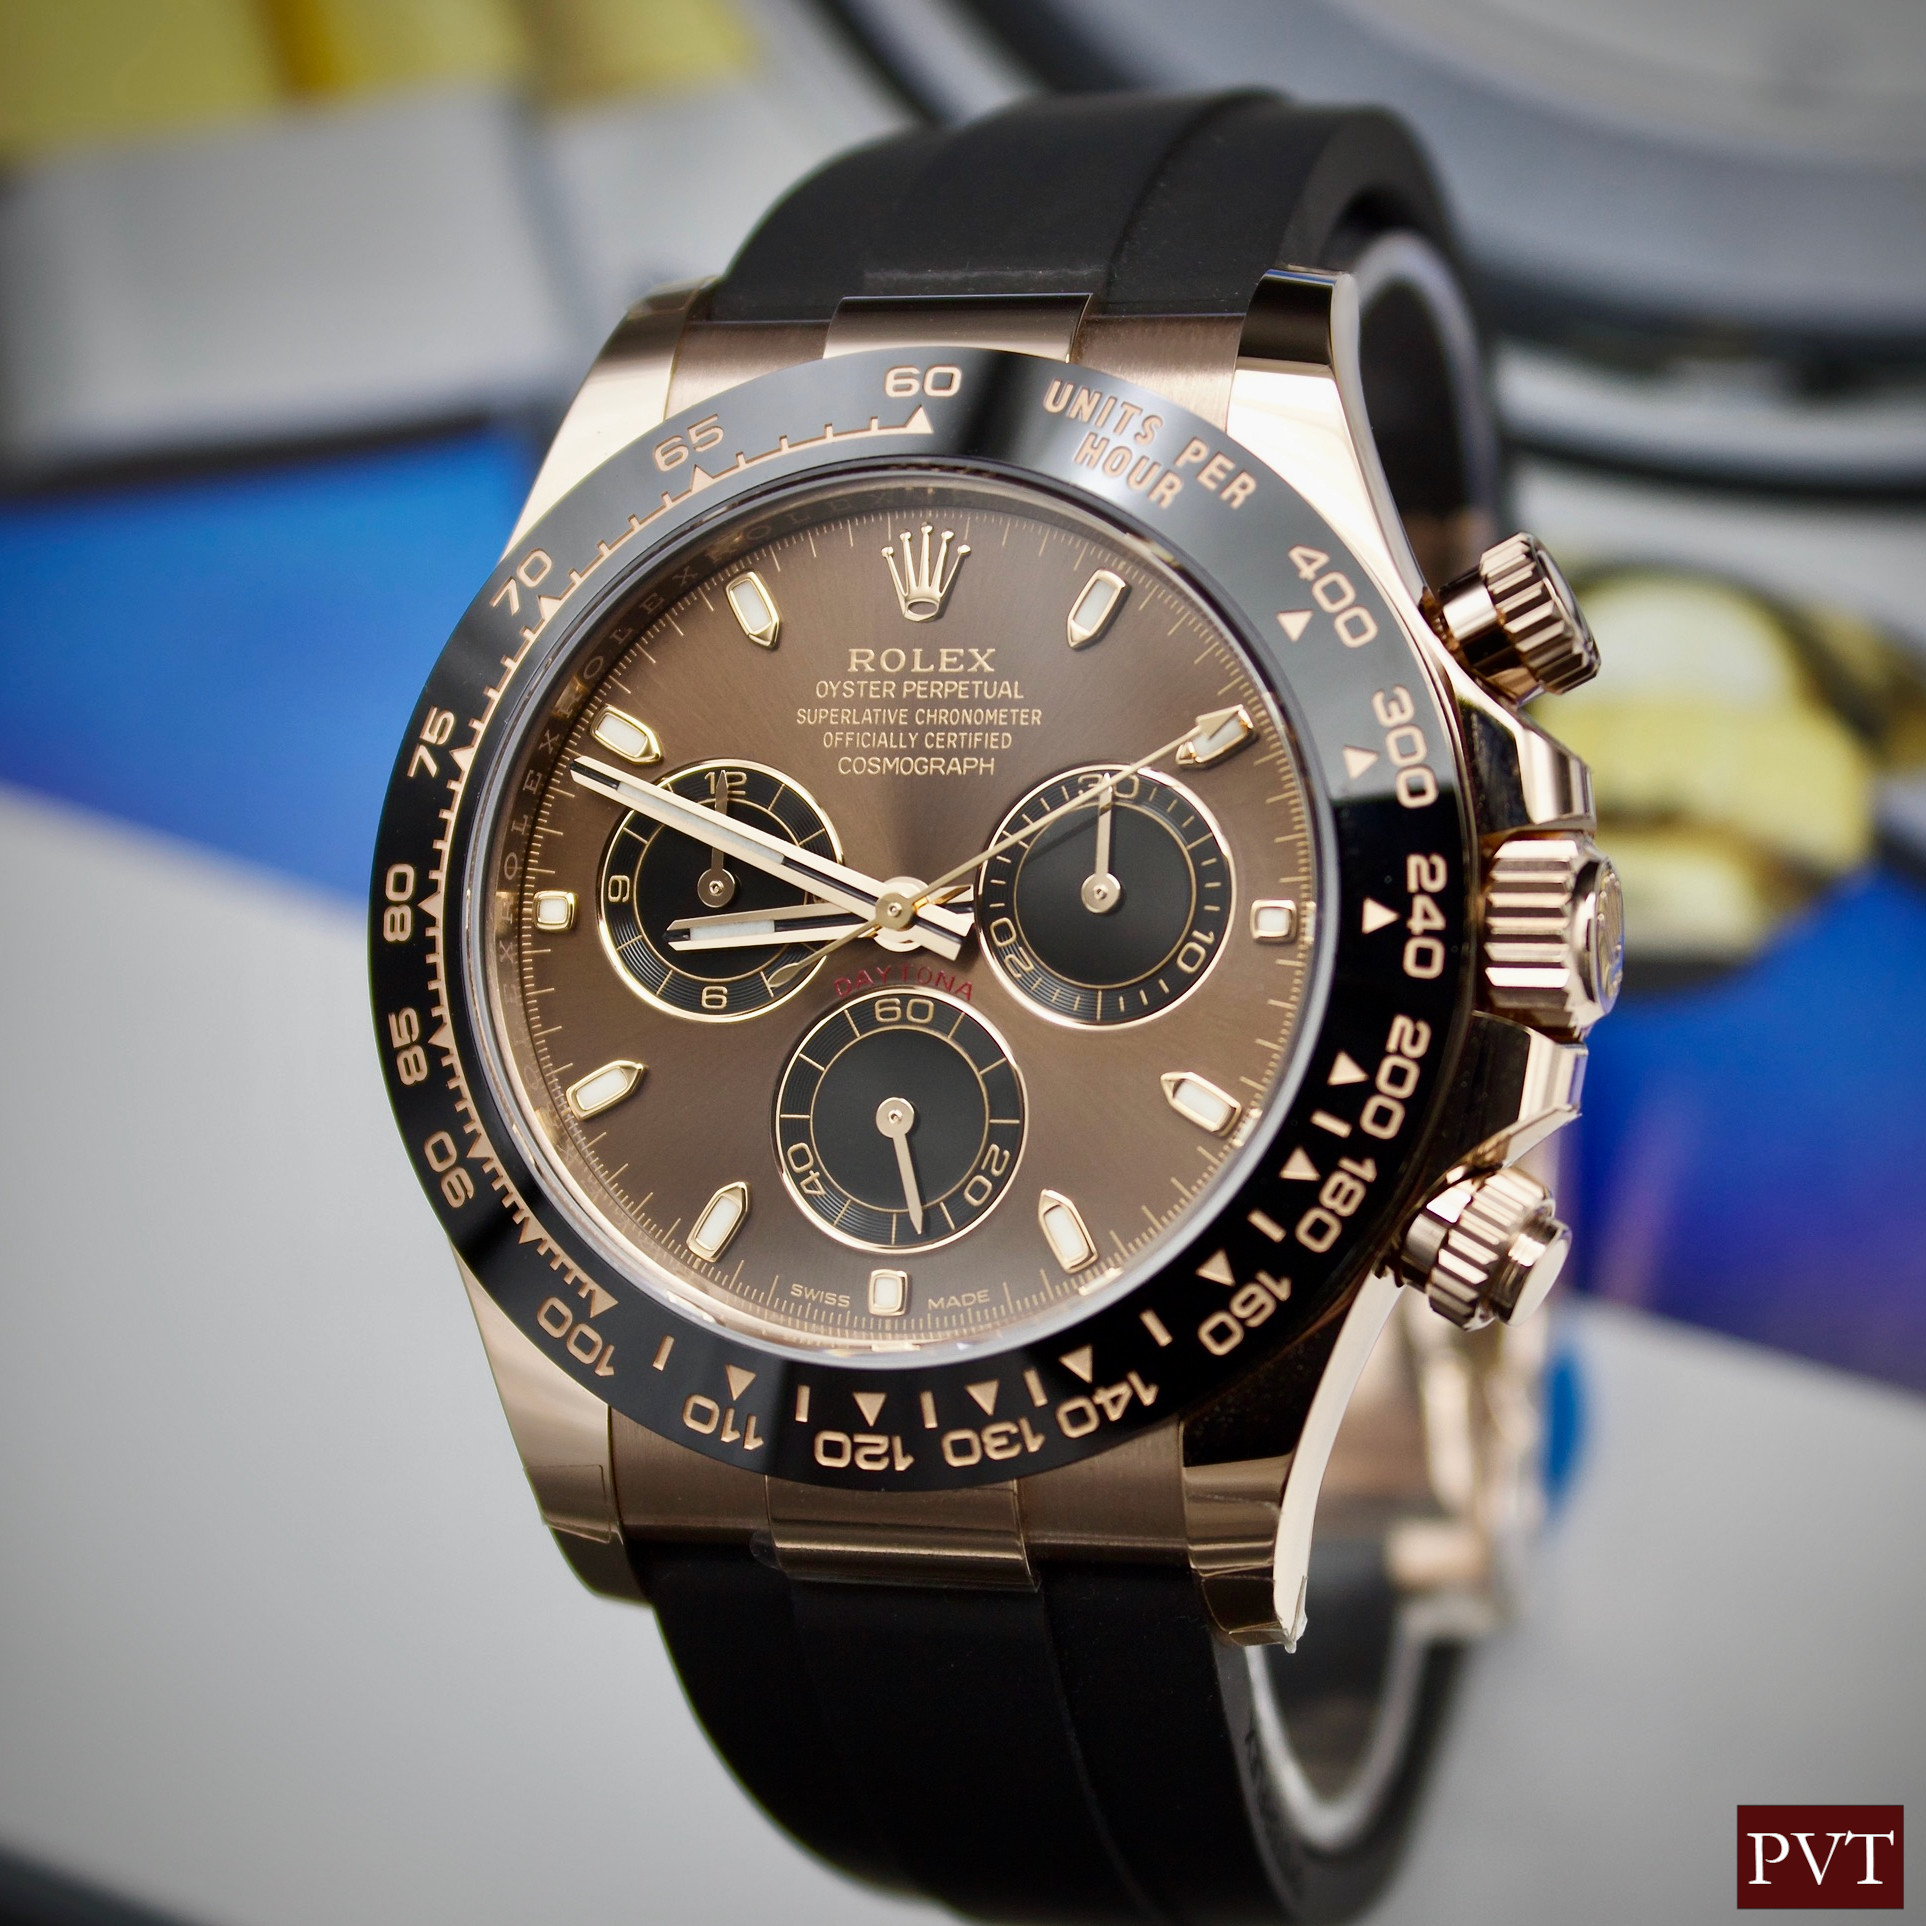 WTS] 2022 Rolex Daytona Rose Gold Chocolate Dial 116515LN - Brand New, Box & Papers |